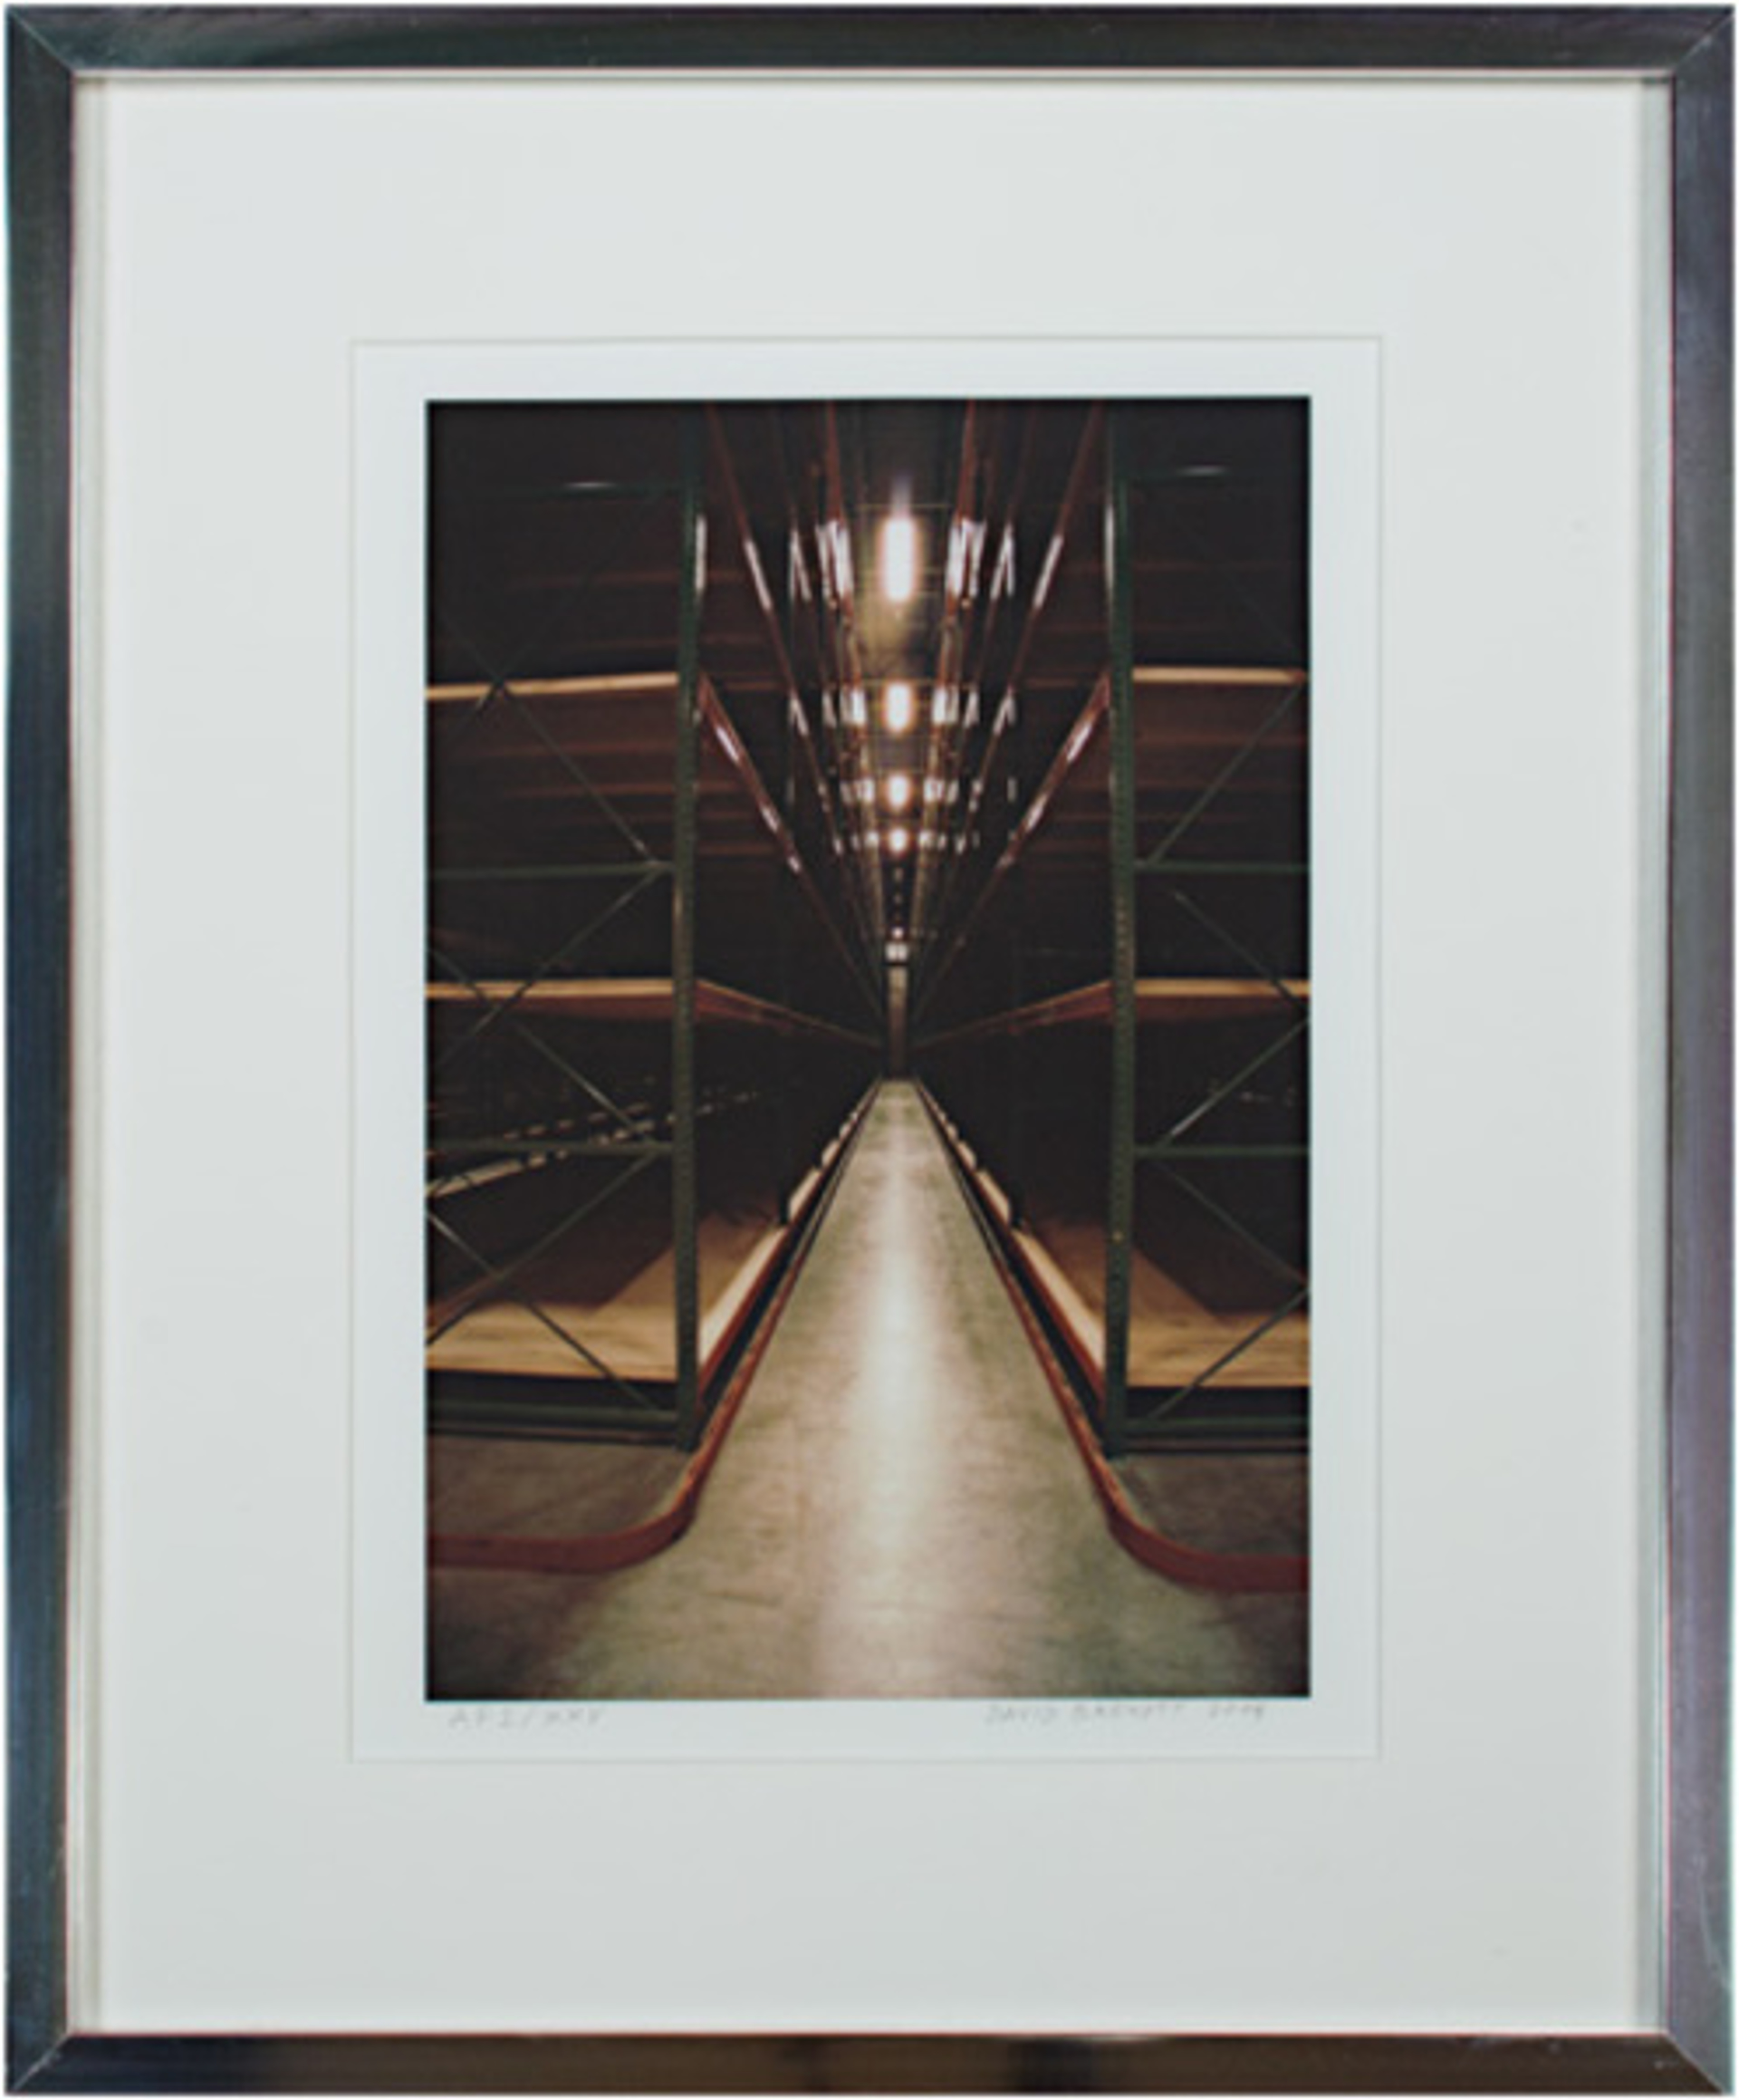 Steinhafel's Warhouse Series Steel Forest Cathedral of Infinite Space, signed on front lower right by David Barnett